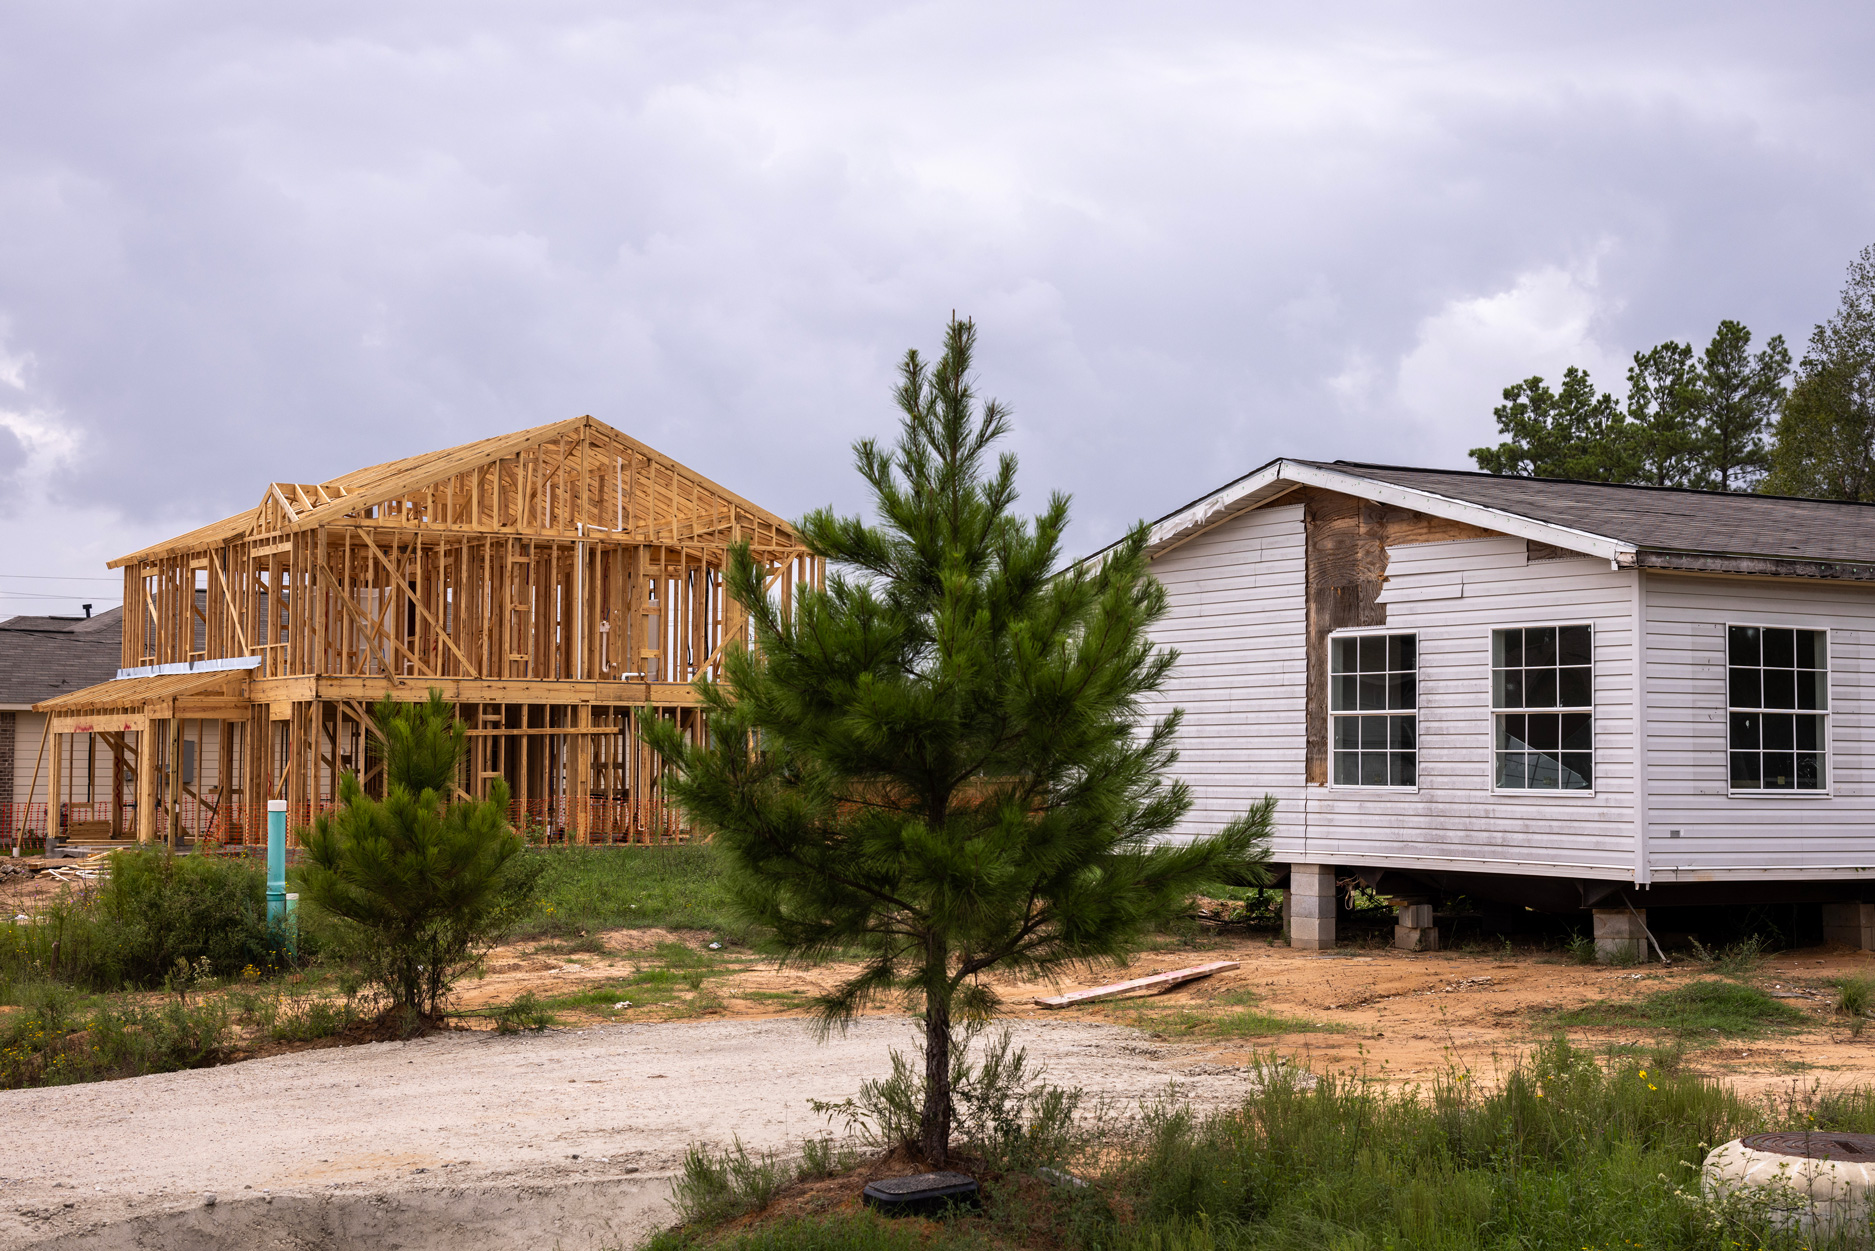 The Colony Ridge community in Liberty County has seen explosive growth in recent years driven by new home construction. The frame of this new home is built next to a weathered home, at right, in the Santa Fe subdivision within the Colony Ridge development.